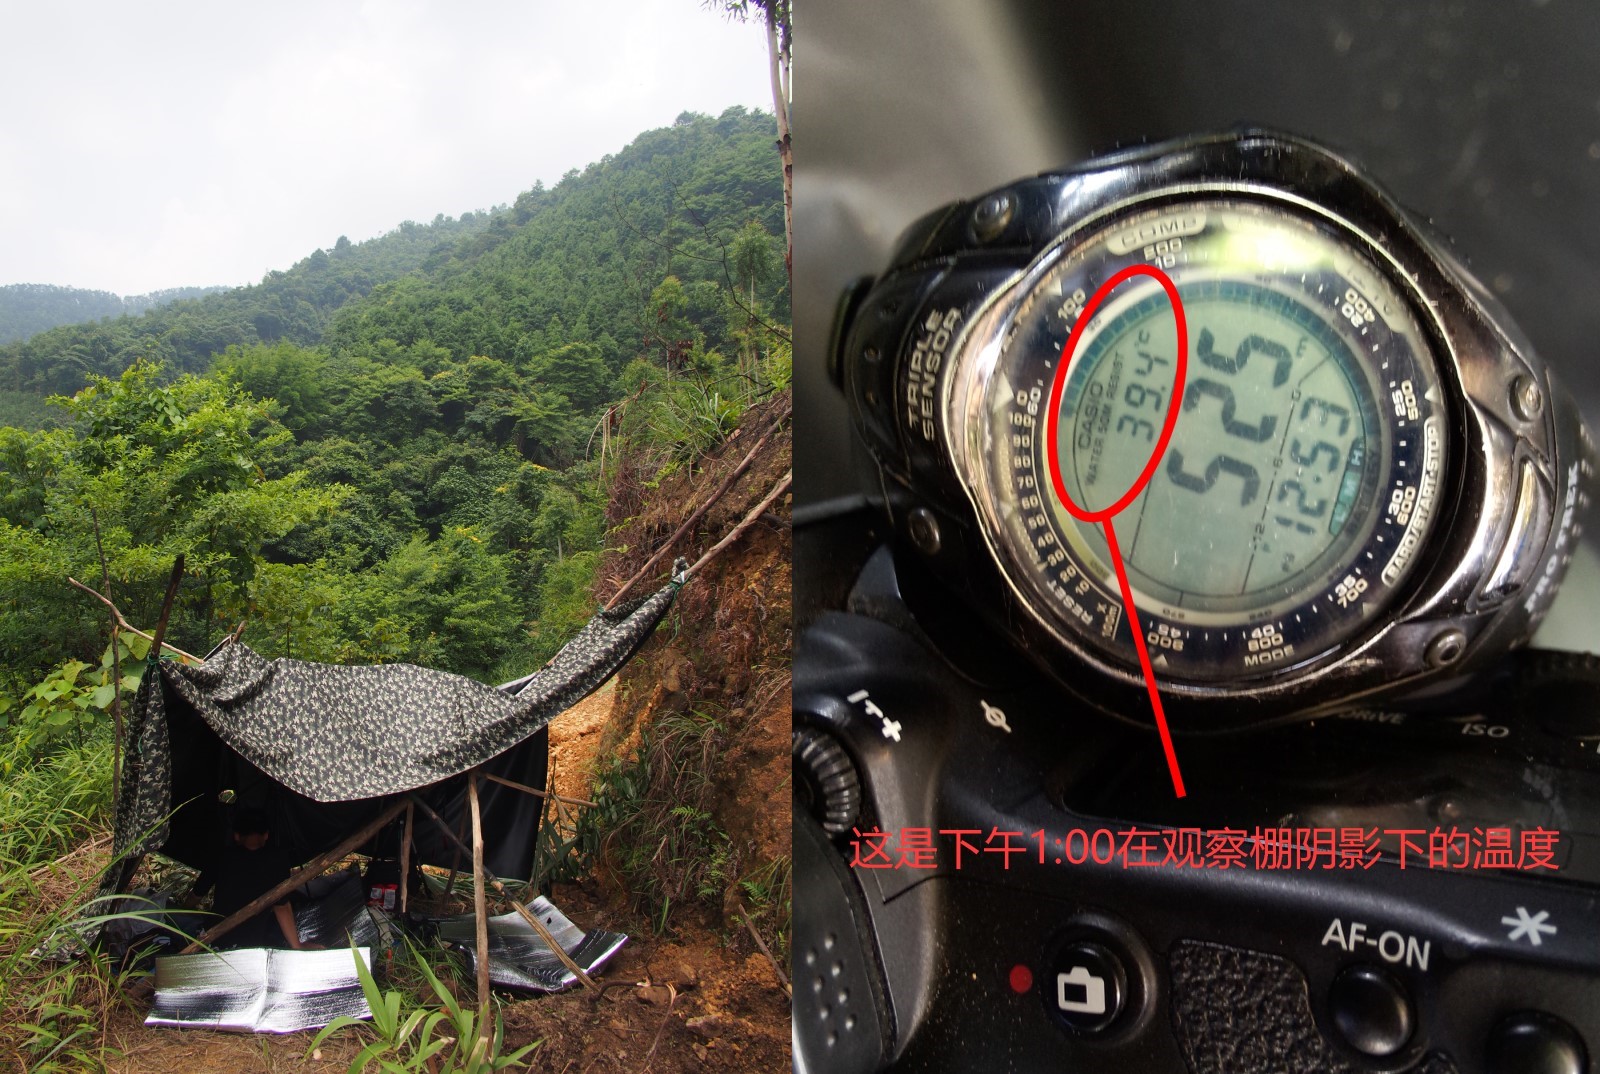 We experienced first-hand how well-insulated from the heat the hornbill’s tree hole must be. At 1pm, the temperature reached a scorching 39.4 degree Celsius inside our tent.